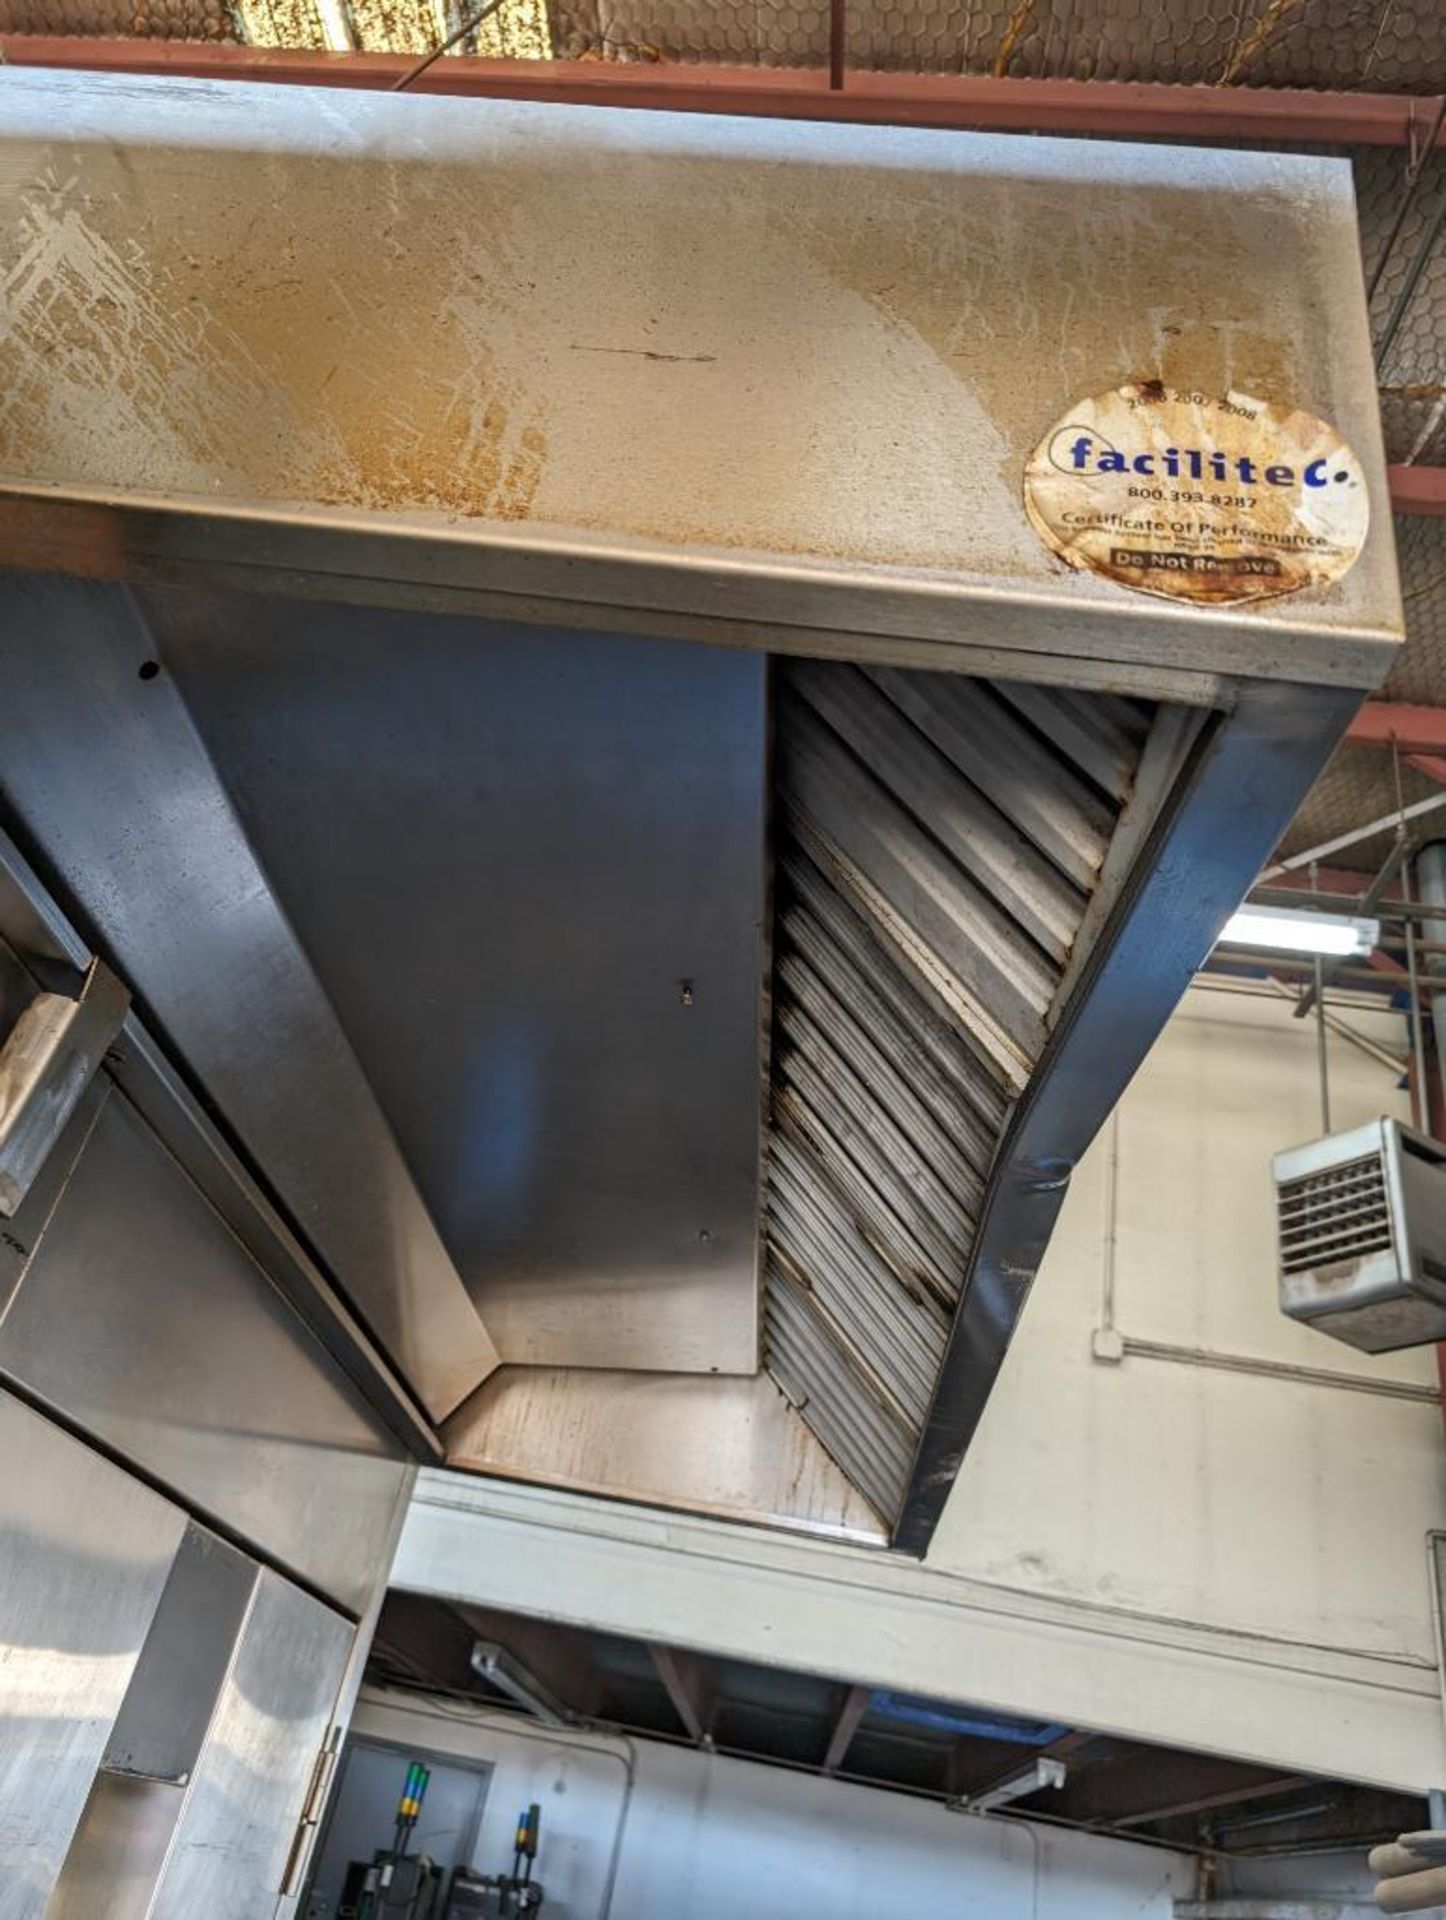 Baxter double rack oven - Image 8 of 10